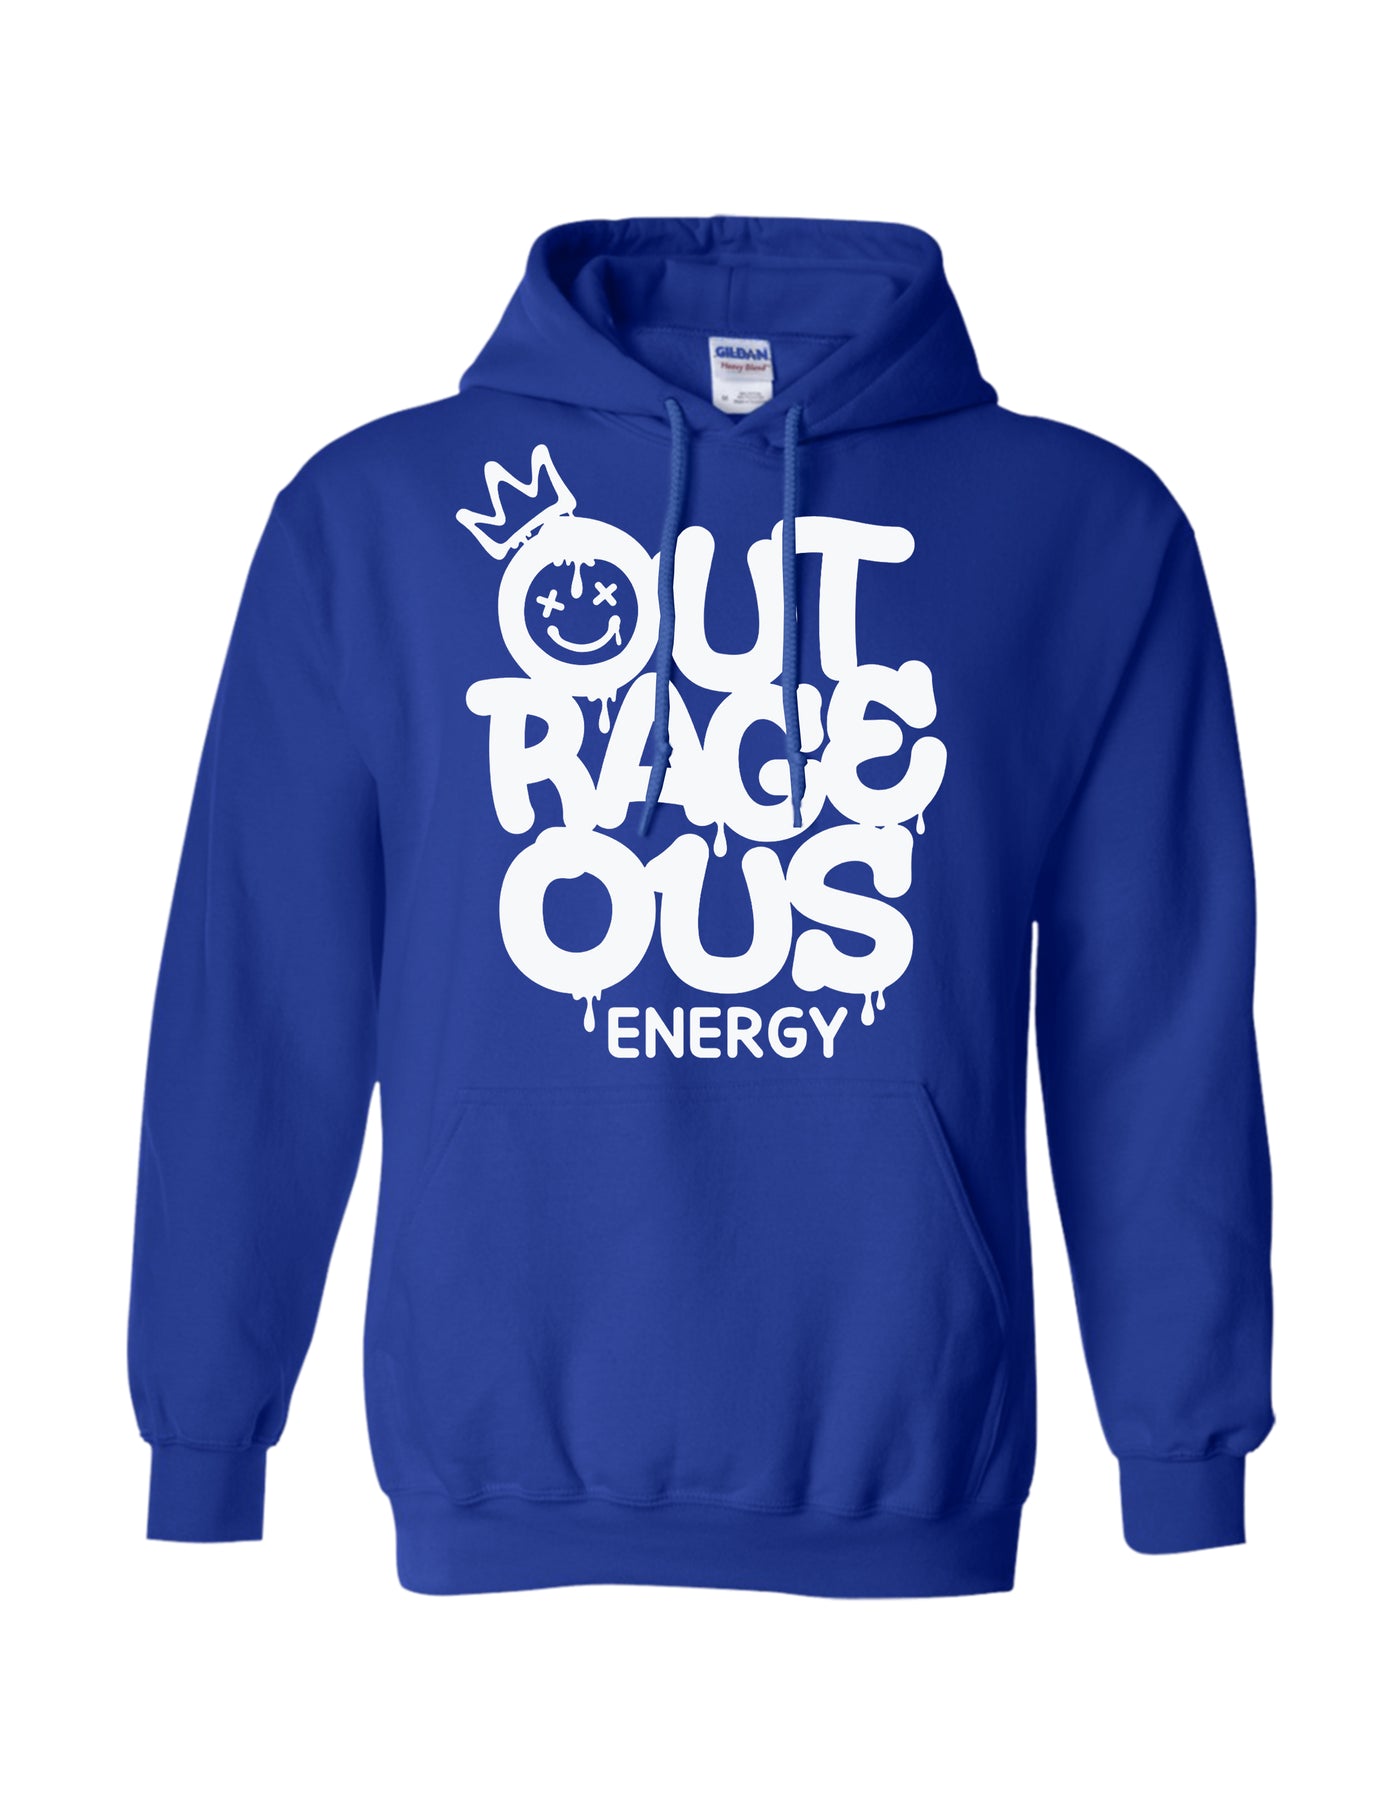 BLUE OUTRAGEOUS ENERGY HOODIE - Outrageous Energy